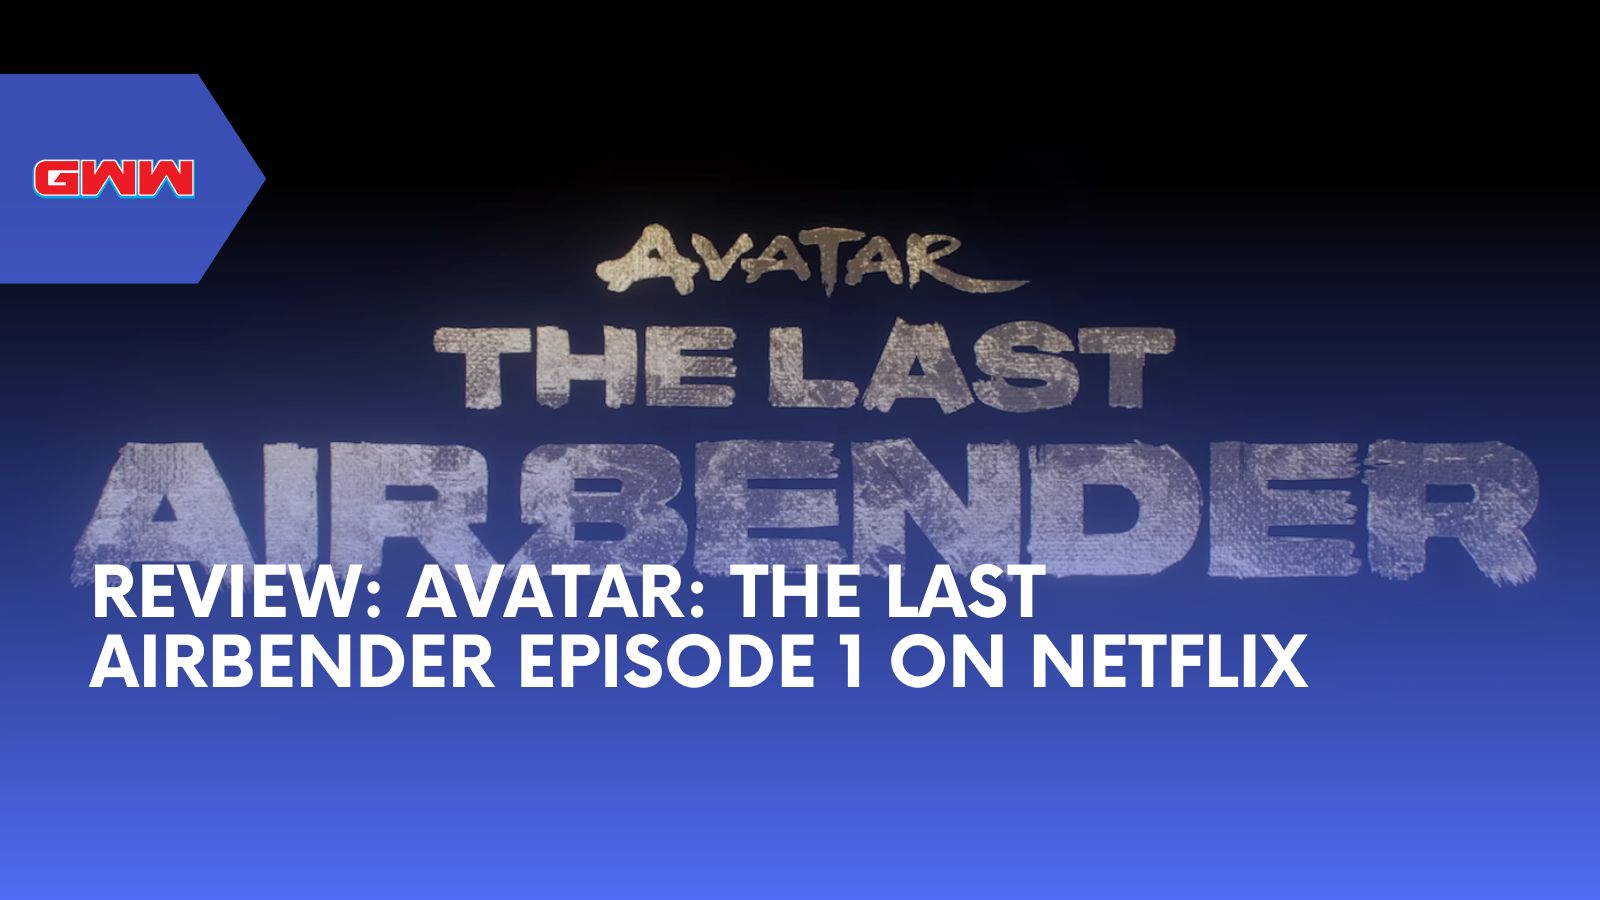 Review: Avatar: The Last Airbender Episode 1 on Netflix